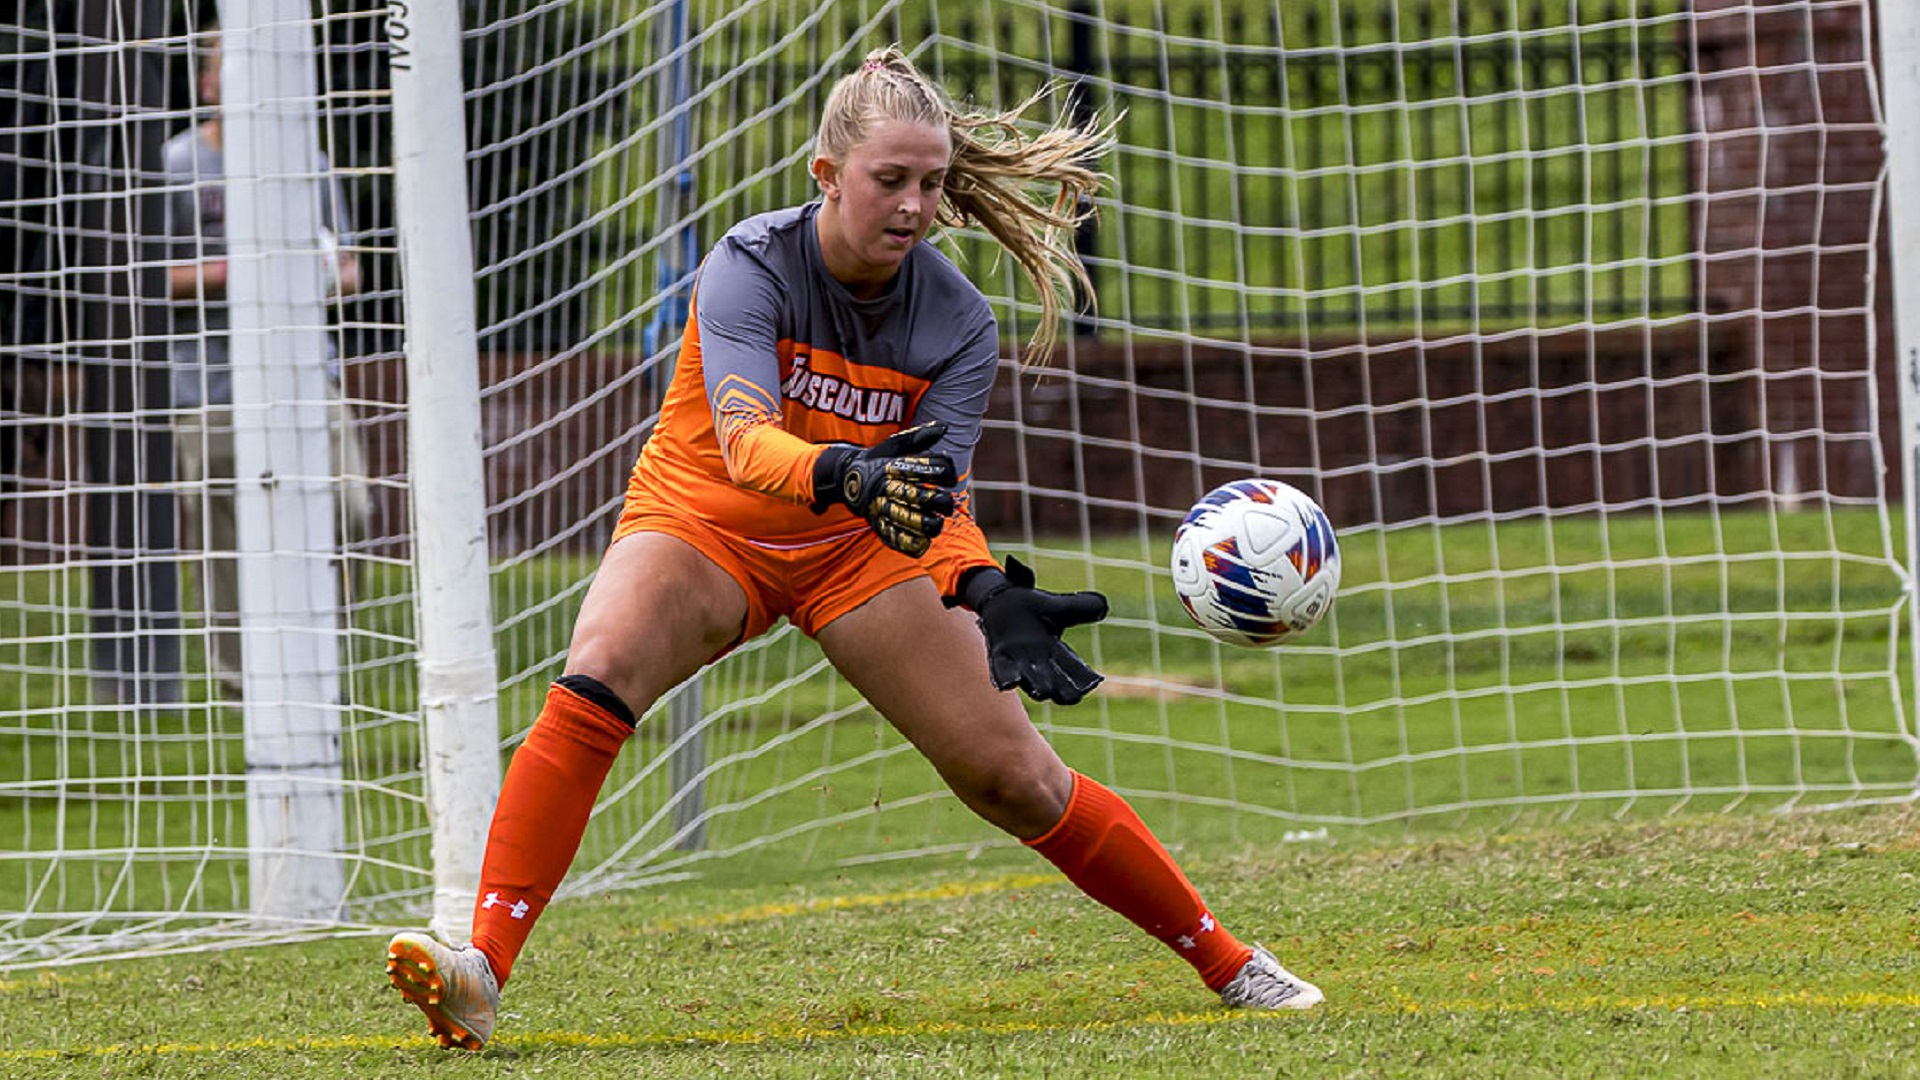 Patterson makes career-high 11 saves to preserve 0-0 draw at Limestone